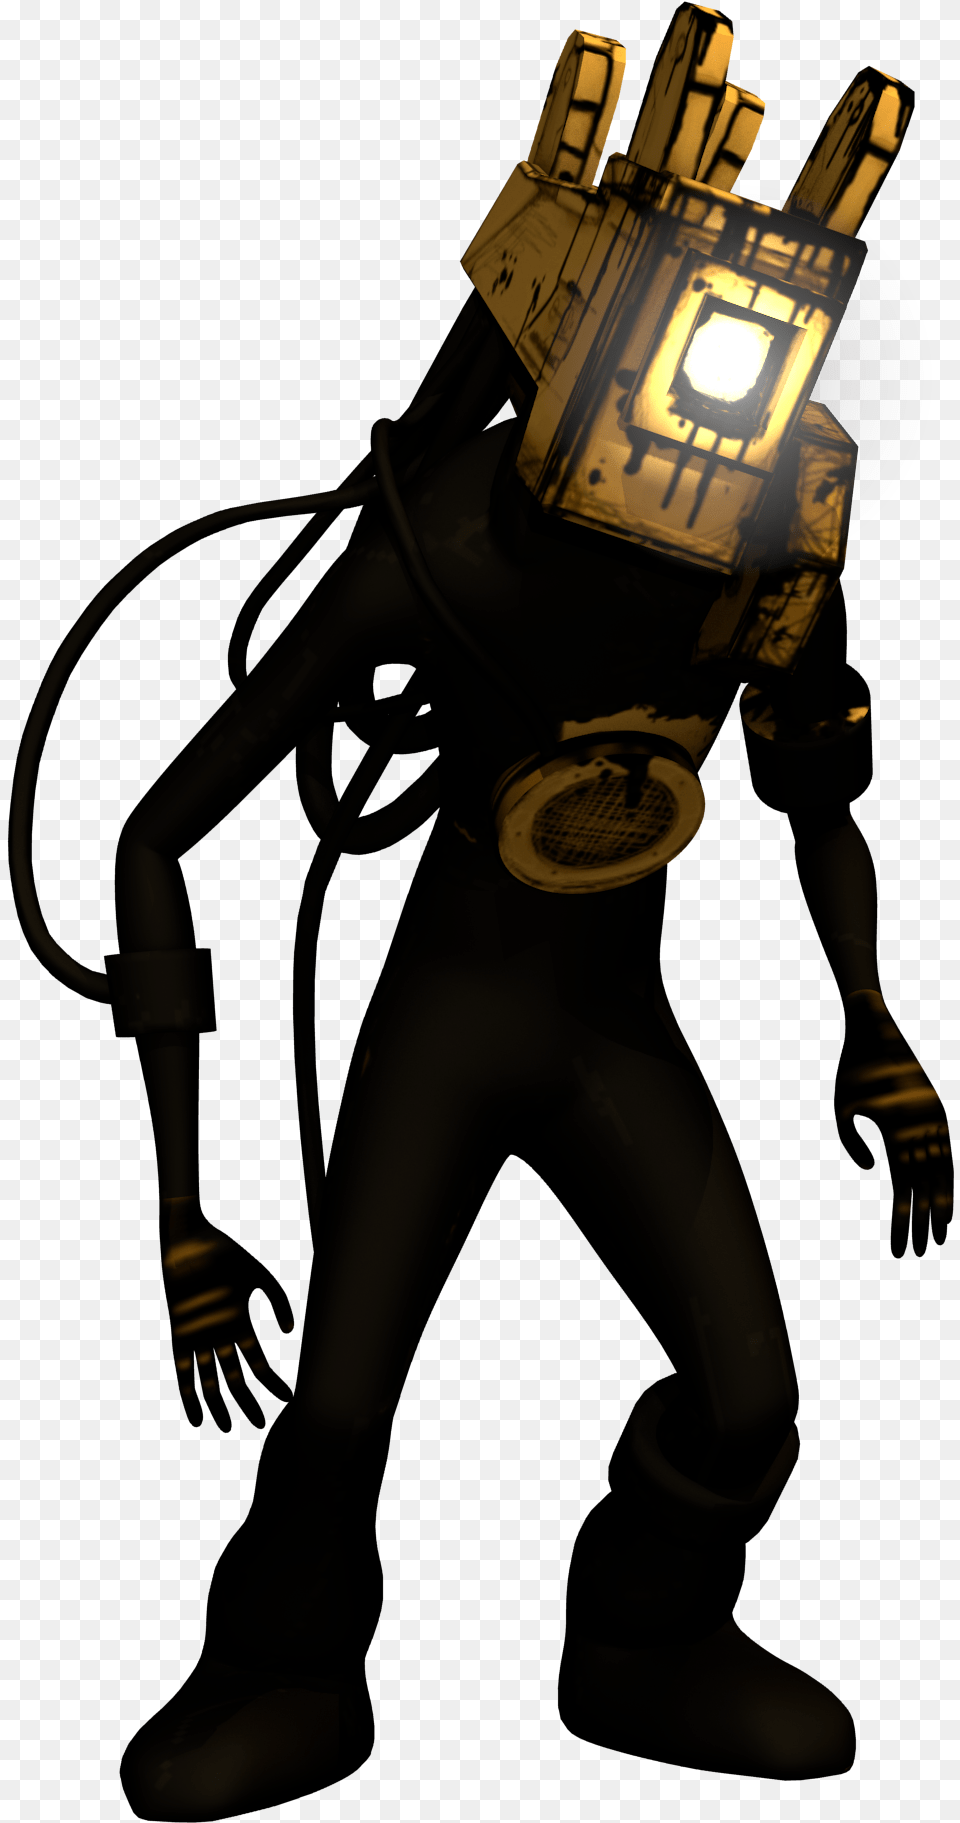 Image Tom From Bendy And The Ink Machine, Adapter, Electronics, Lighting, Plug Free Transparent Png